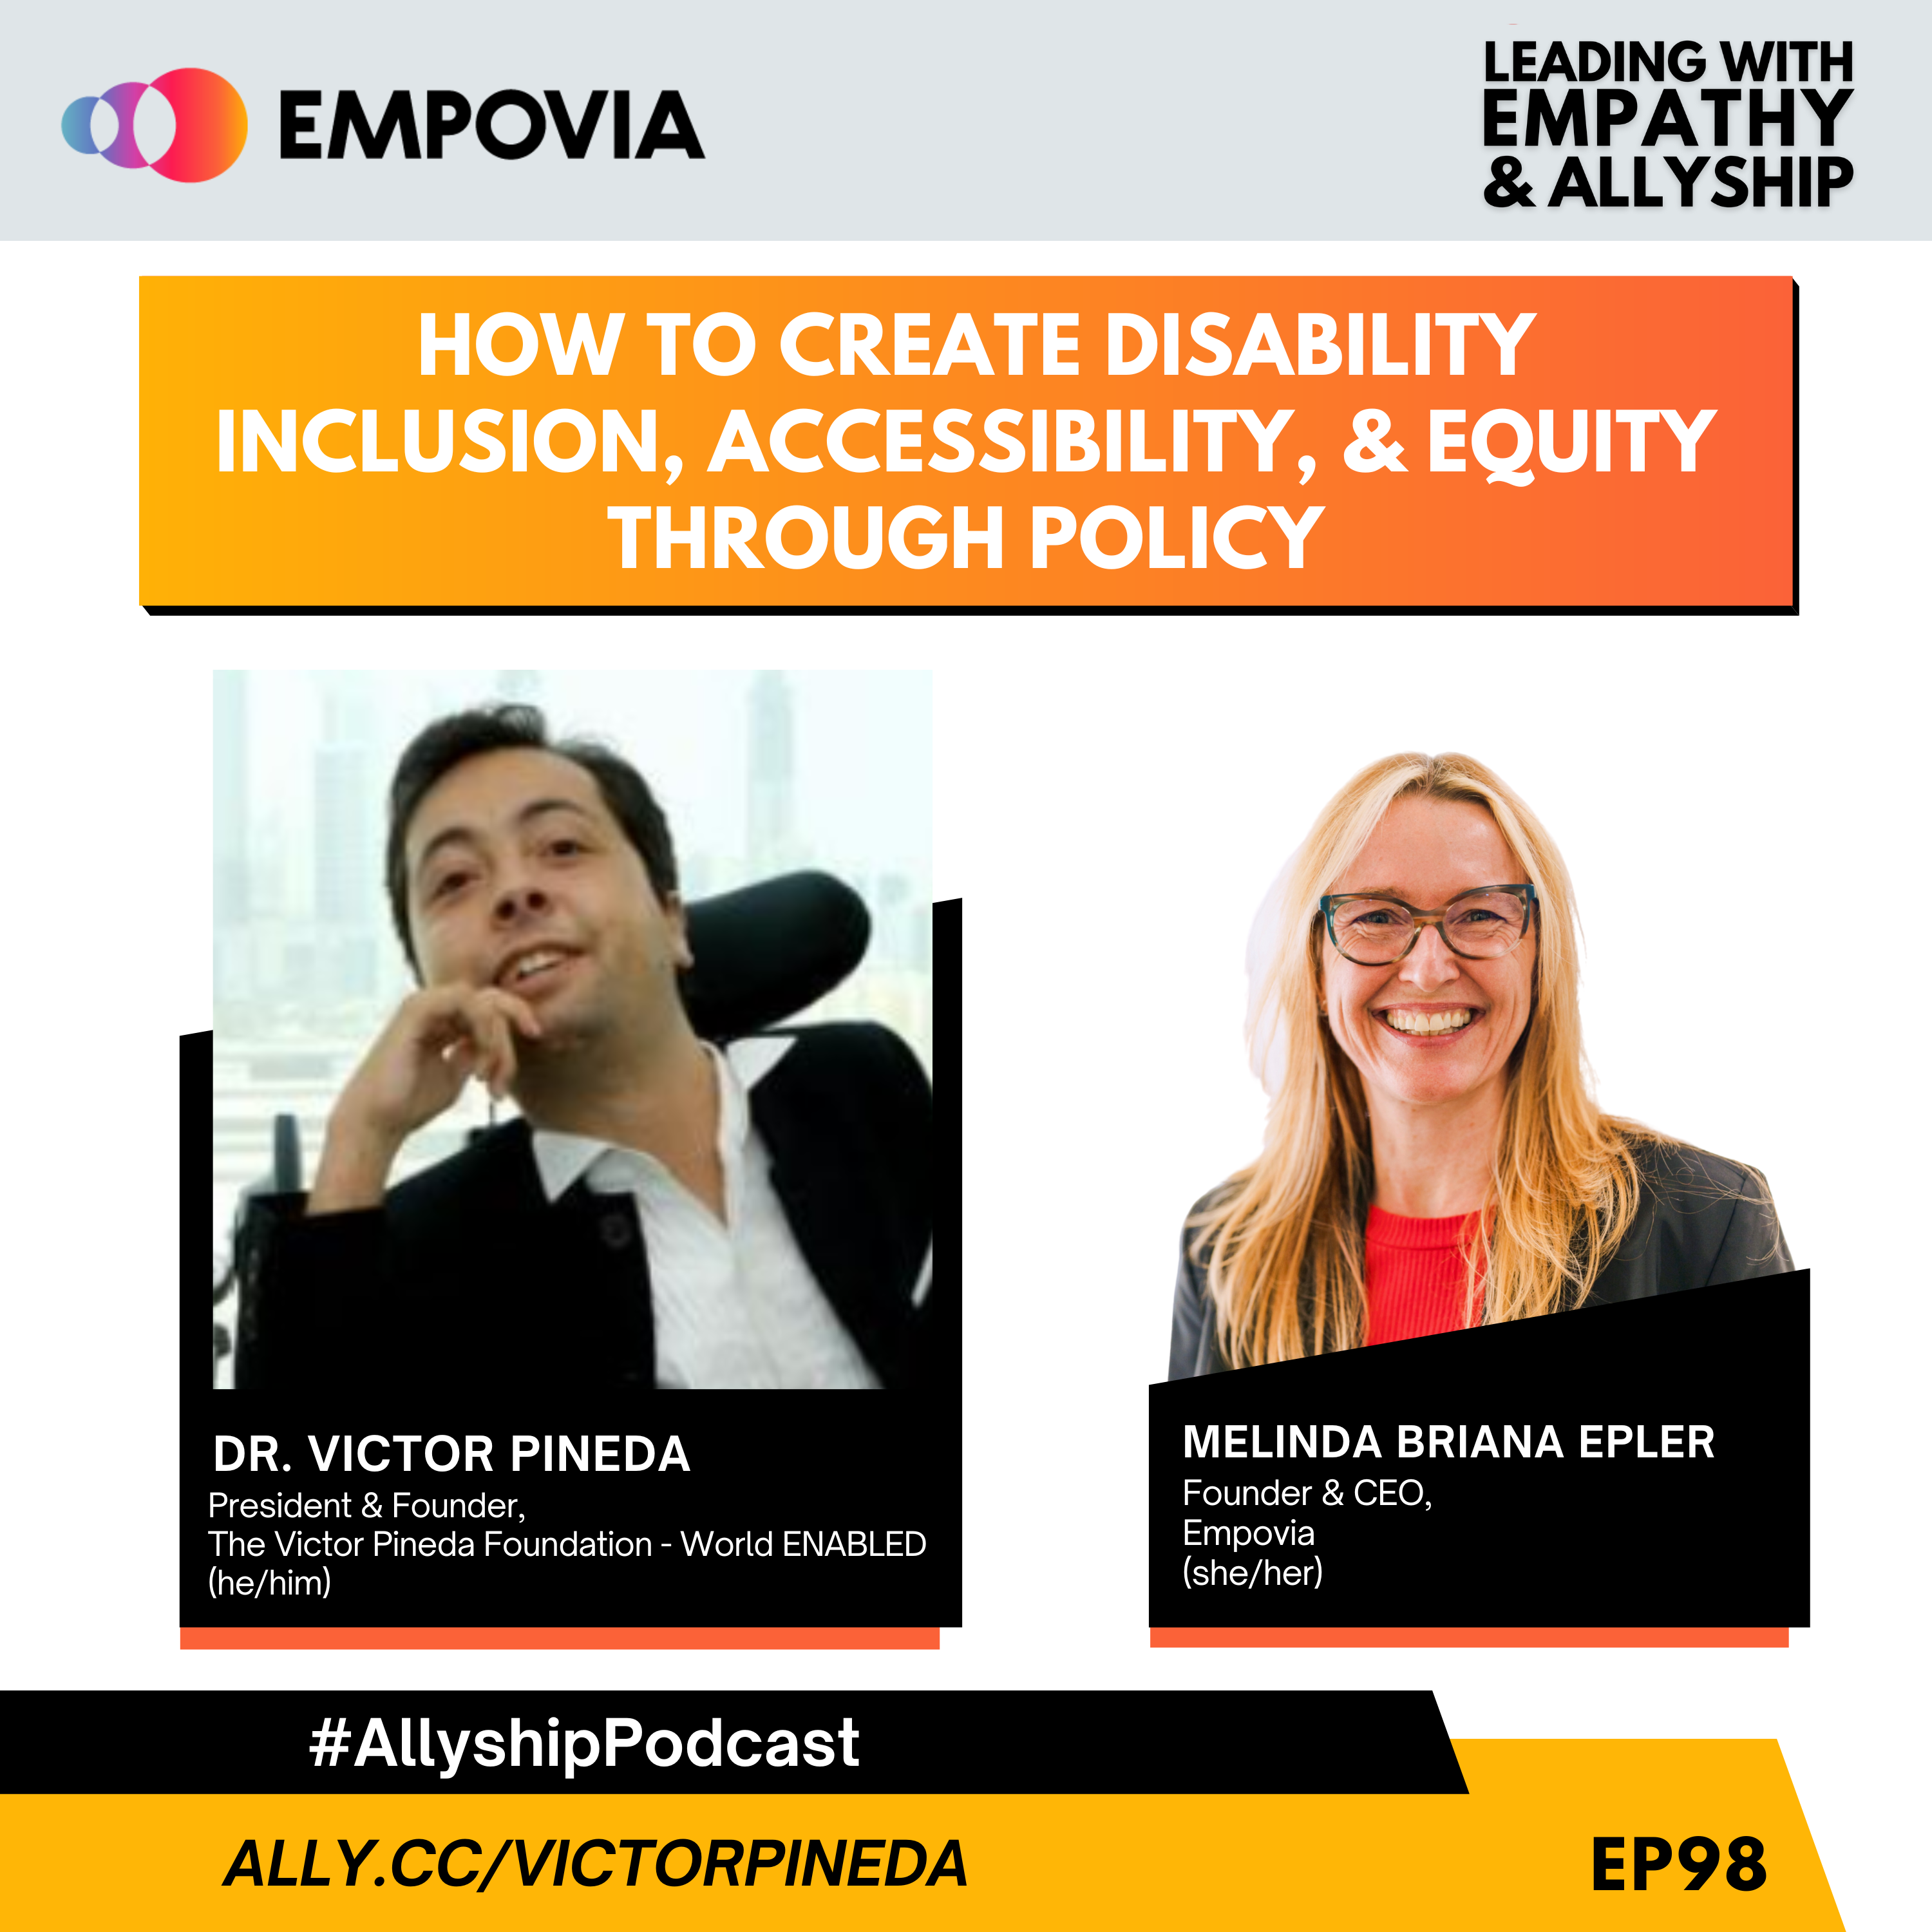 Leading With Empathy & Allyship promo and photos of Dr. Victor Pineda, a man sitting in an electric wheelchair with dark hair, a white button-down, and black suit jacket; and host Melinda Briana Epler, a White woman with blonde and red hair, glasses, red shirt, and black jacket.